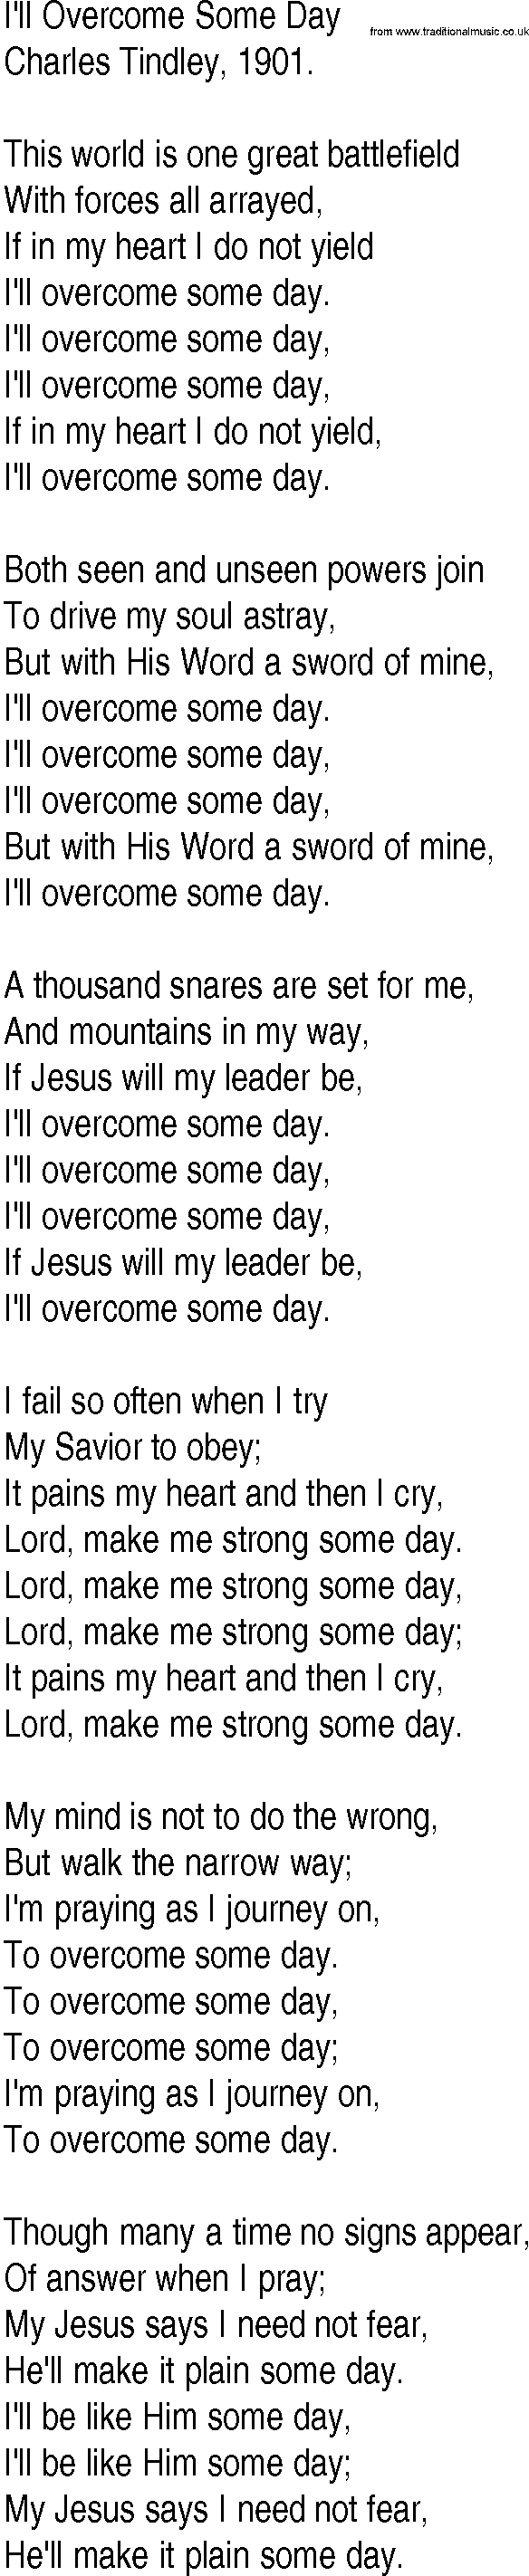 Hymn and Gospel Song: I'll Overcome Some Day by Charles Tindley lyrics